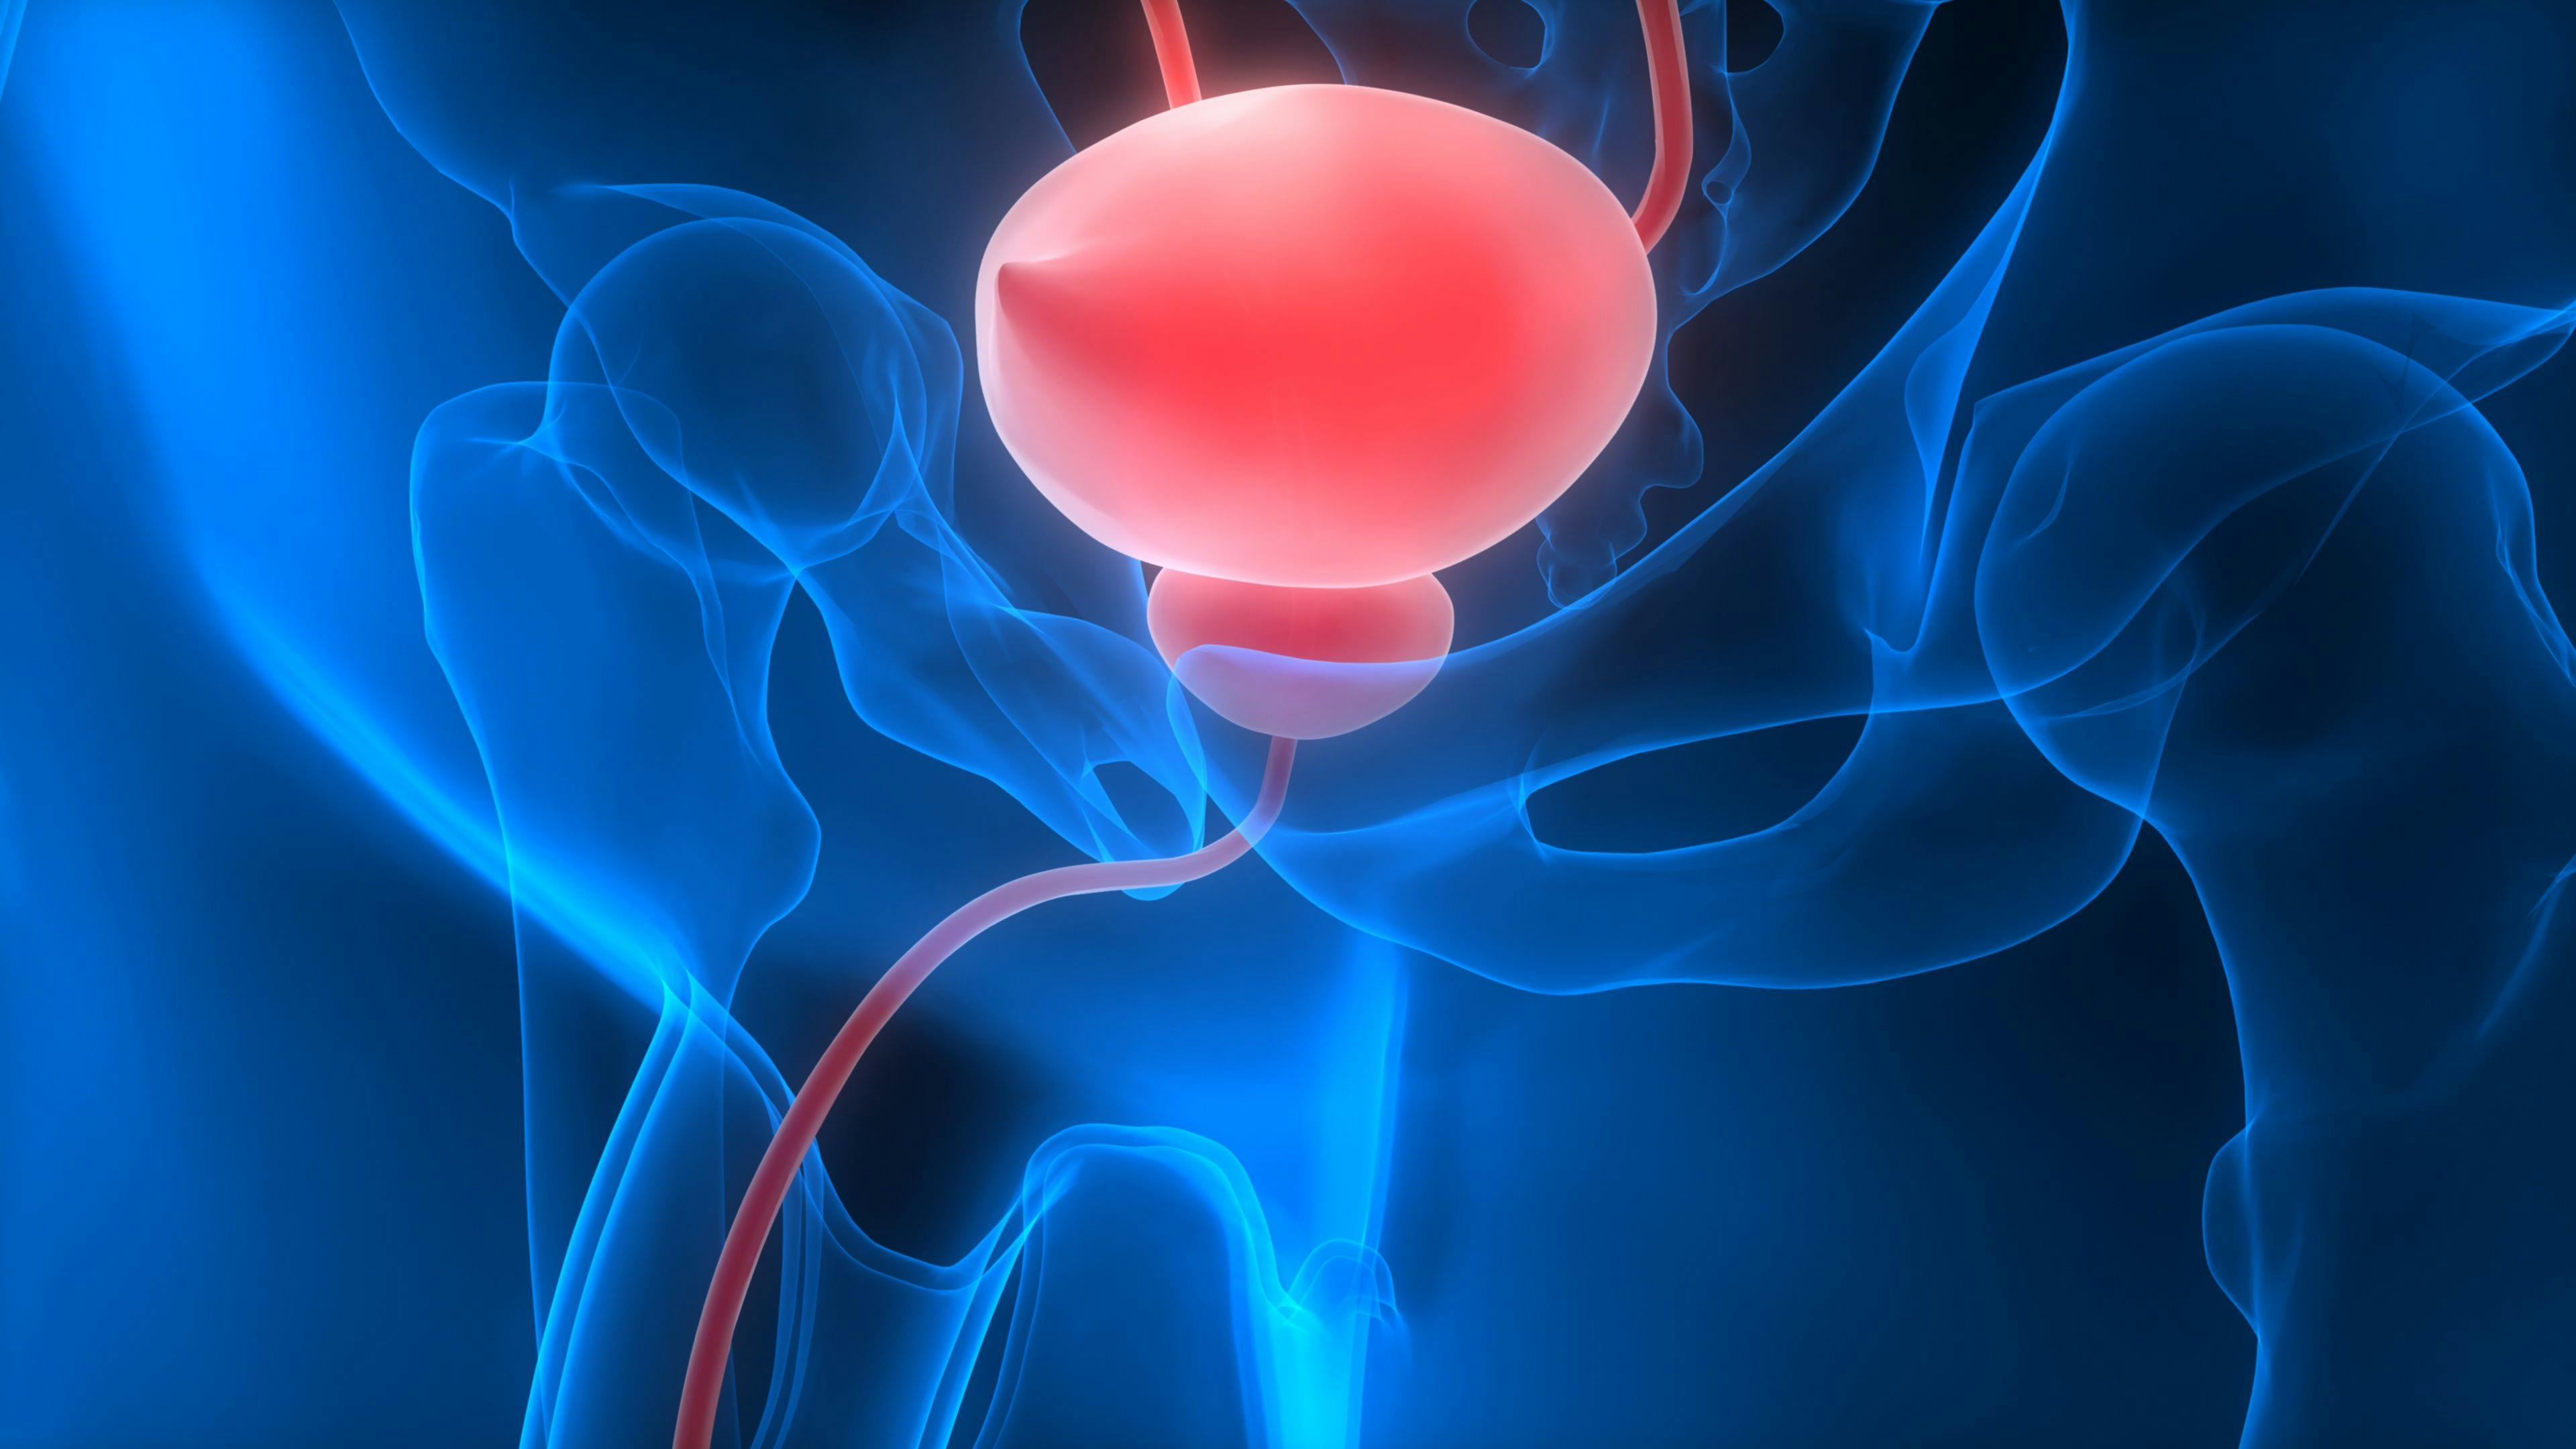 FDA Declines N-803 Combo Approval in Non-Muscle Invasive Bladder Cancer | Image Credit: © magicmine - stock.adobe.com.